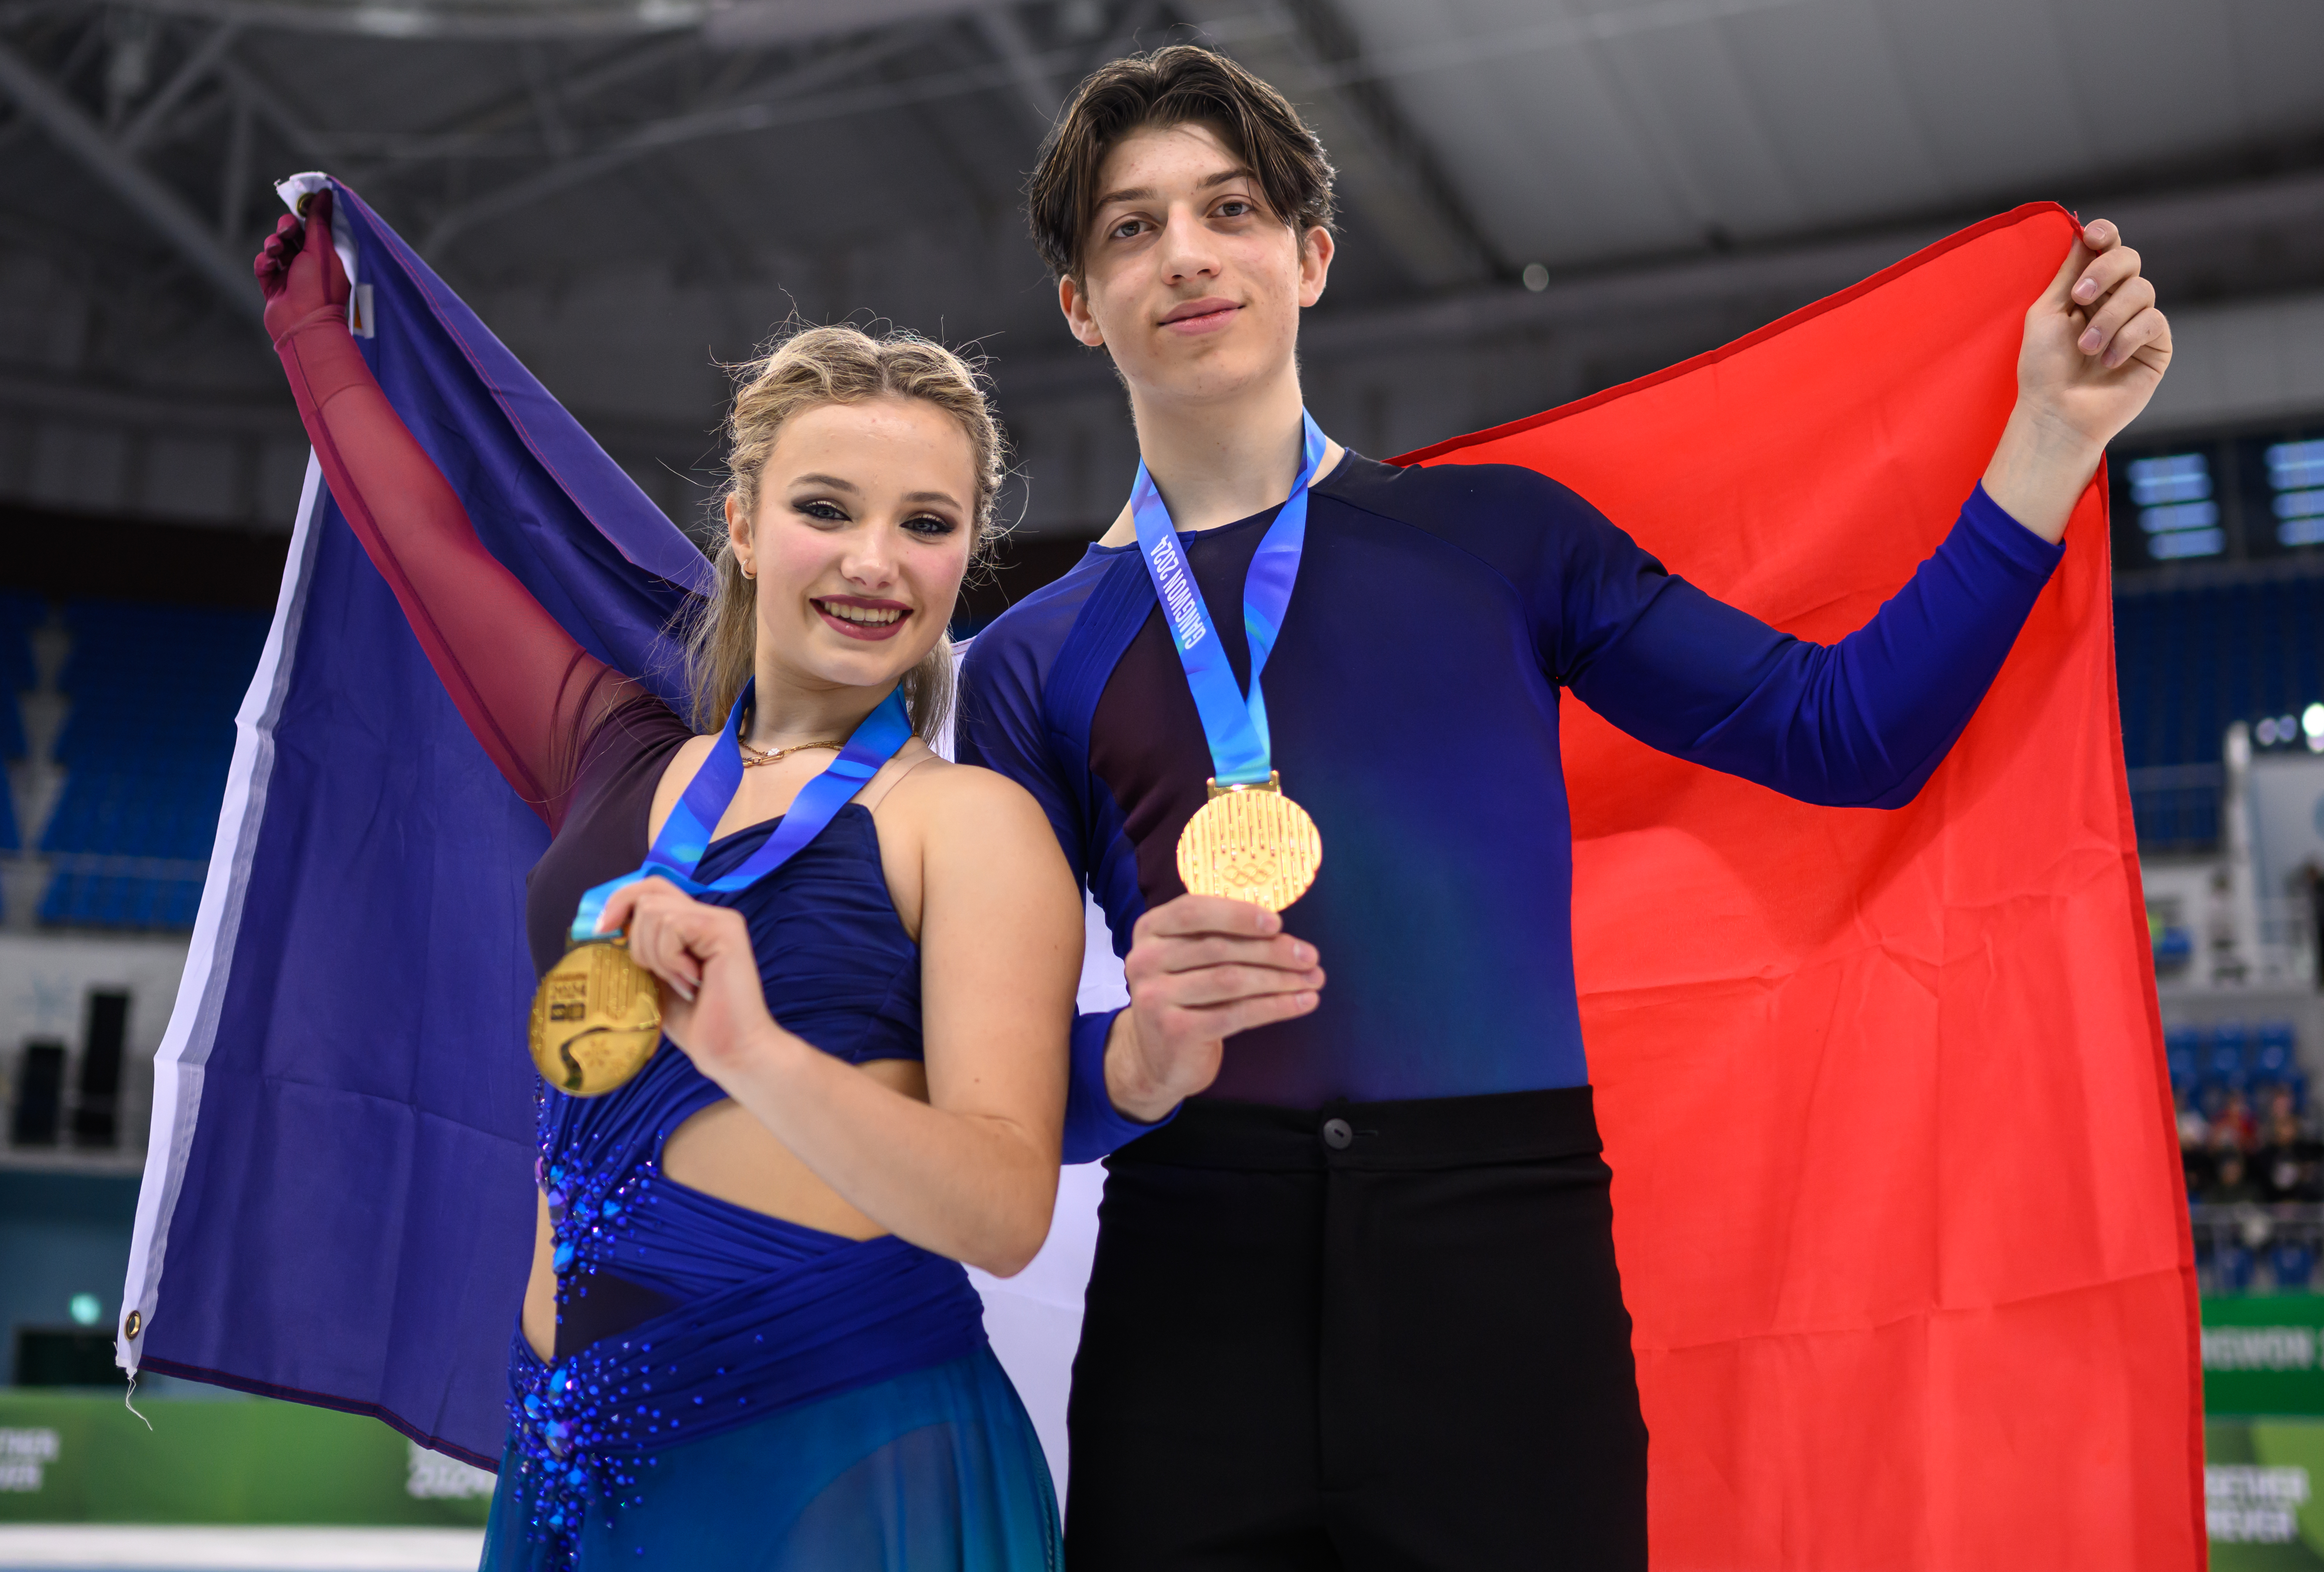 Gold medalists Ambre Perrier Gianesini (FRA) and Samuel Blanc Klaperman (FRA) on the ice with their national flag after the medal ceremony for the Ice Dance